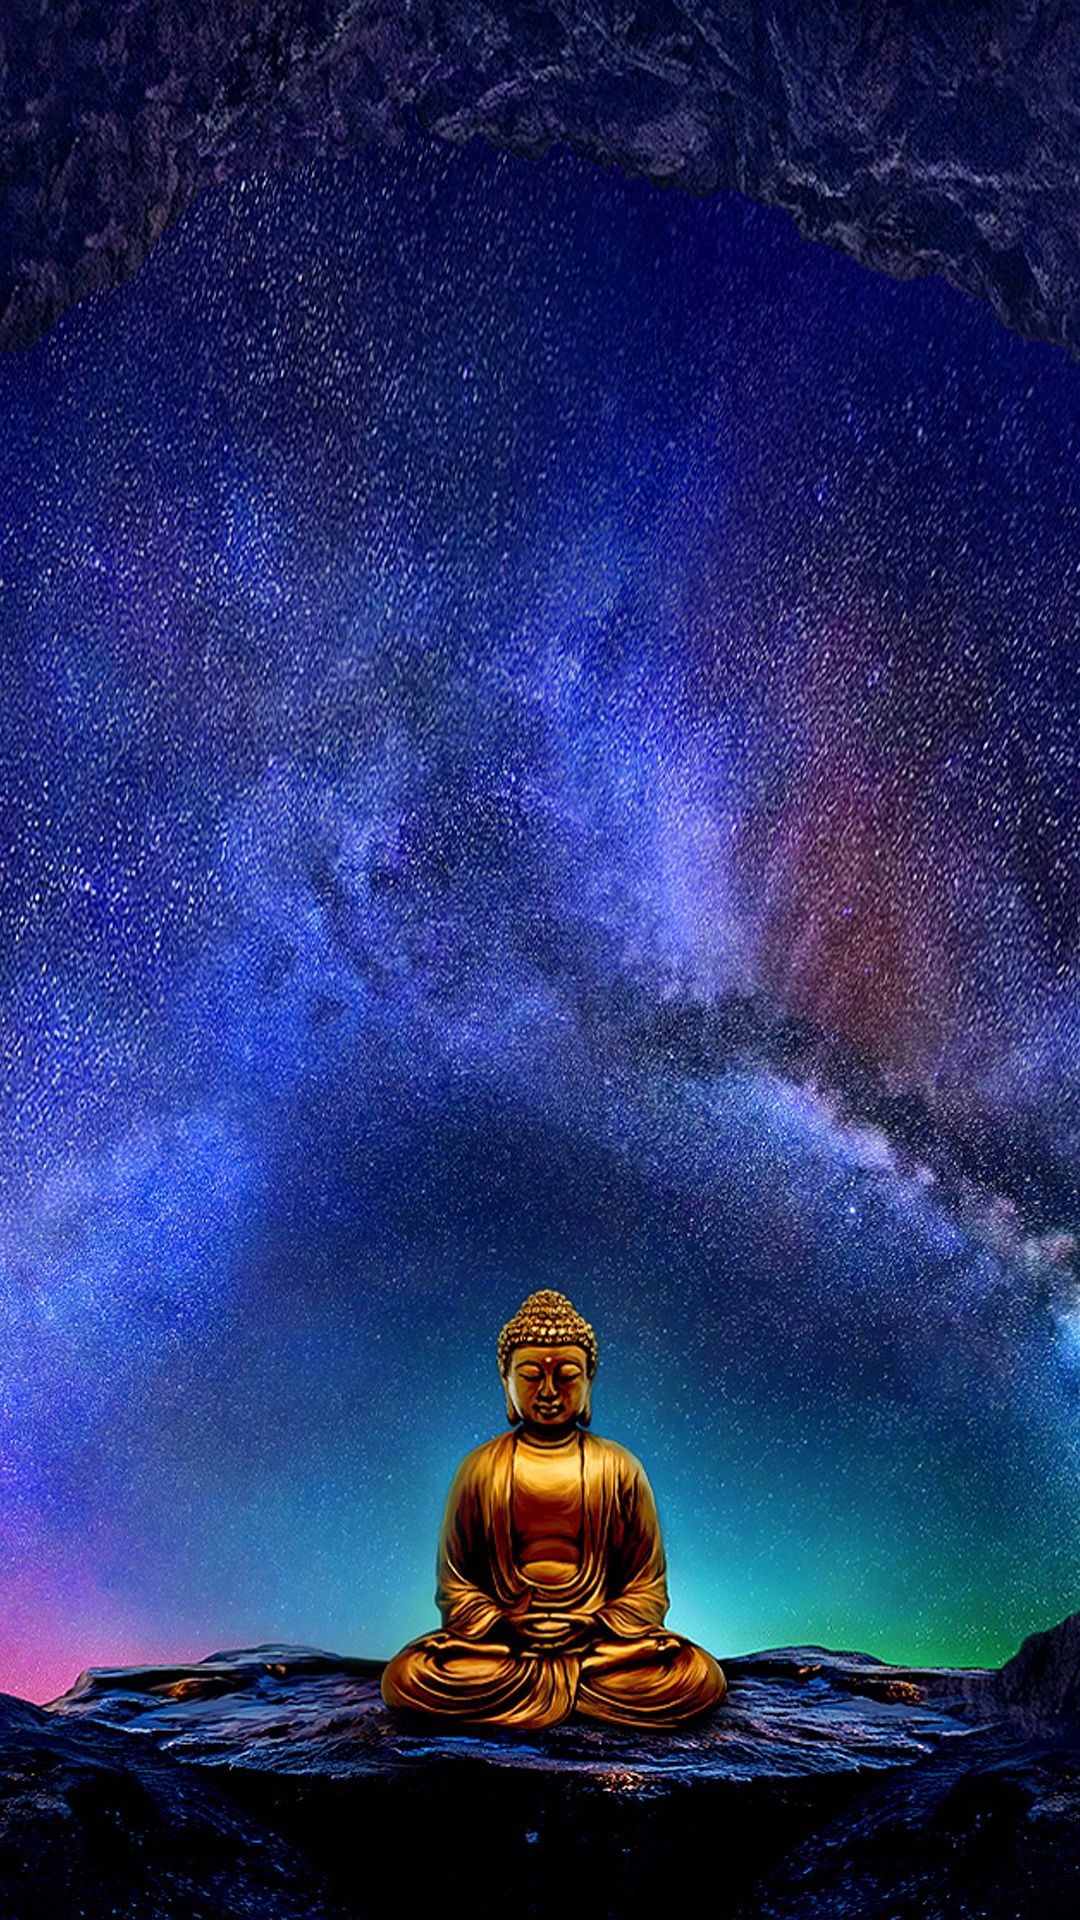 1080x1920 Buddha Wallpaper for Mobile Devices – Artwork by GoodVibesGallery.com